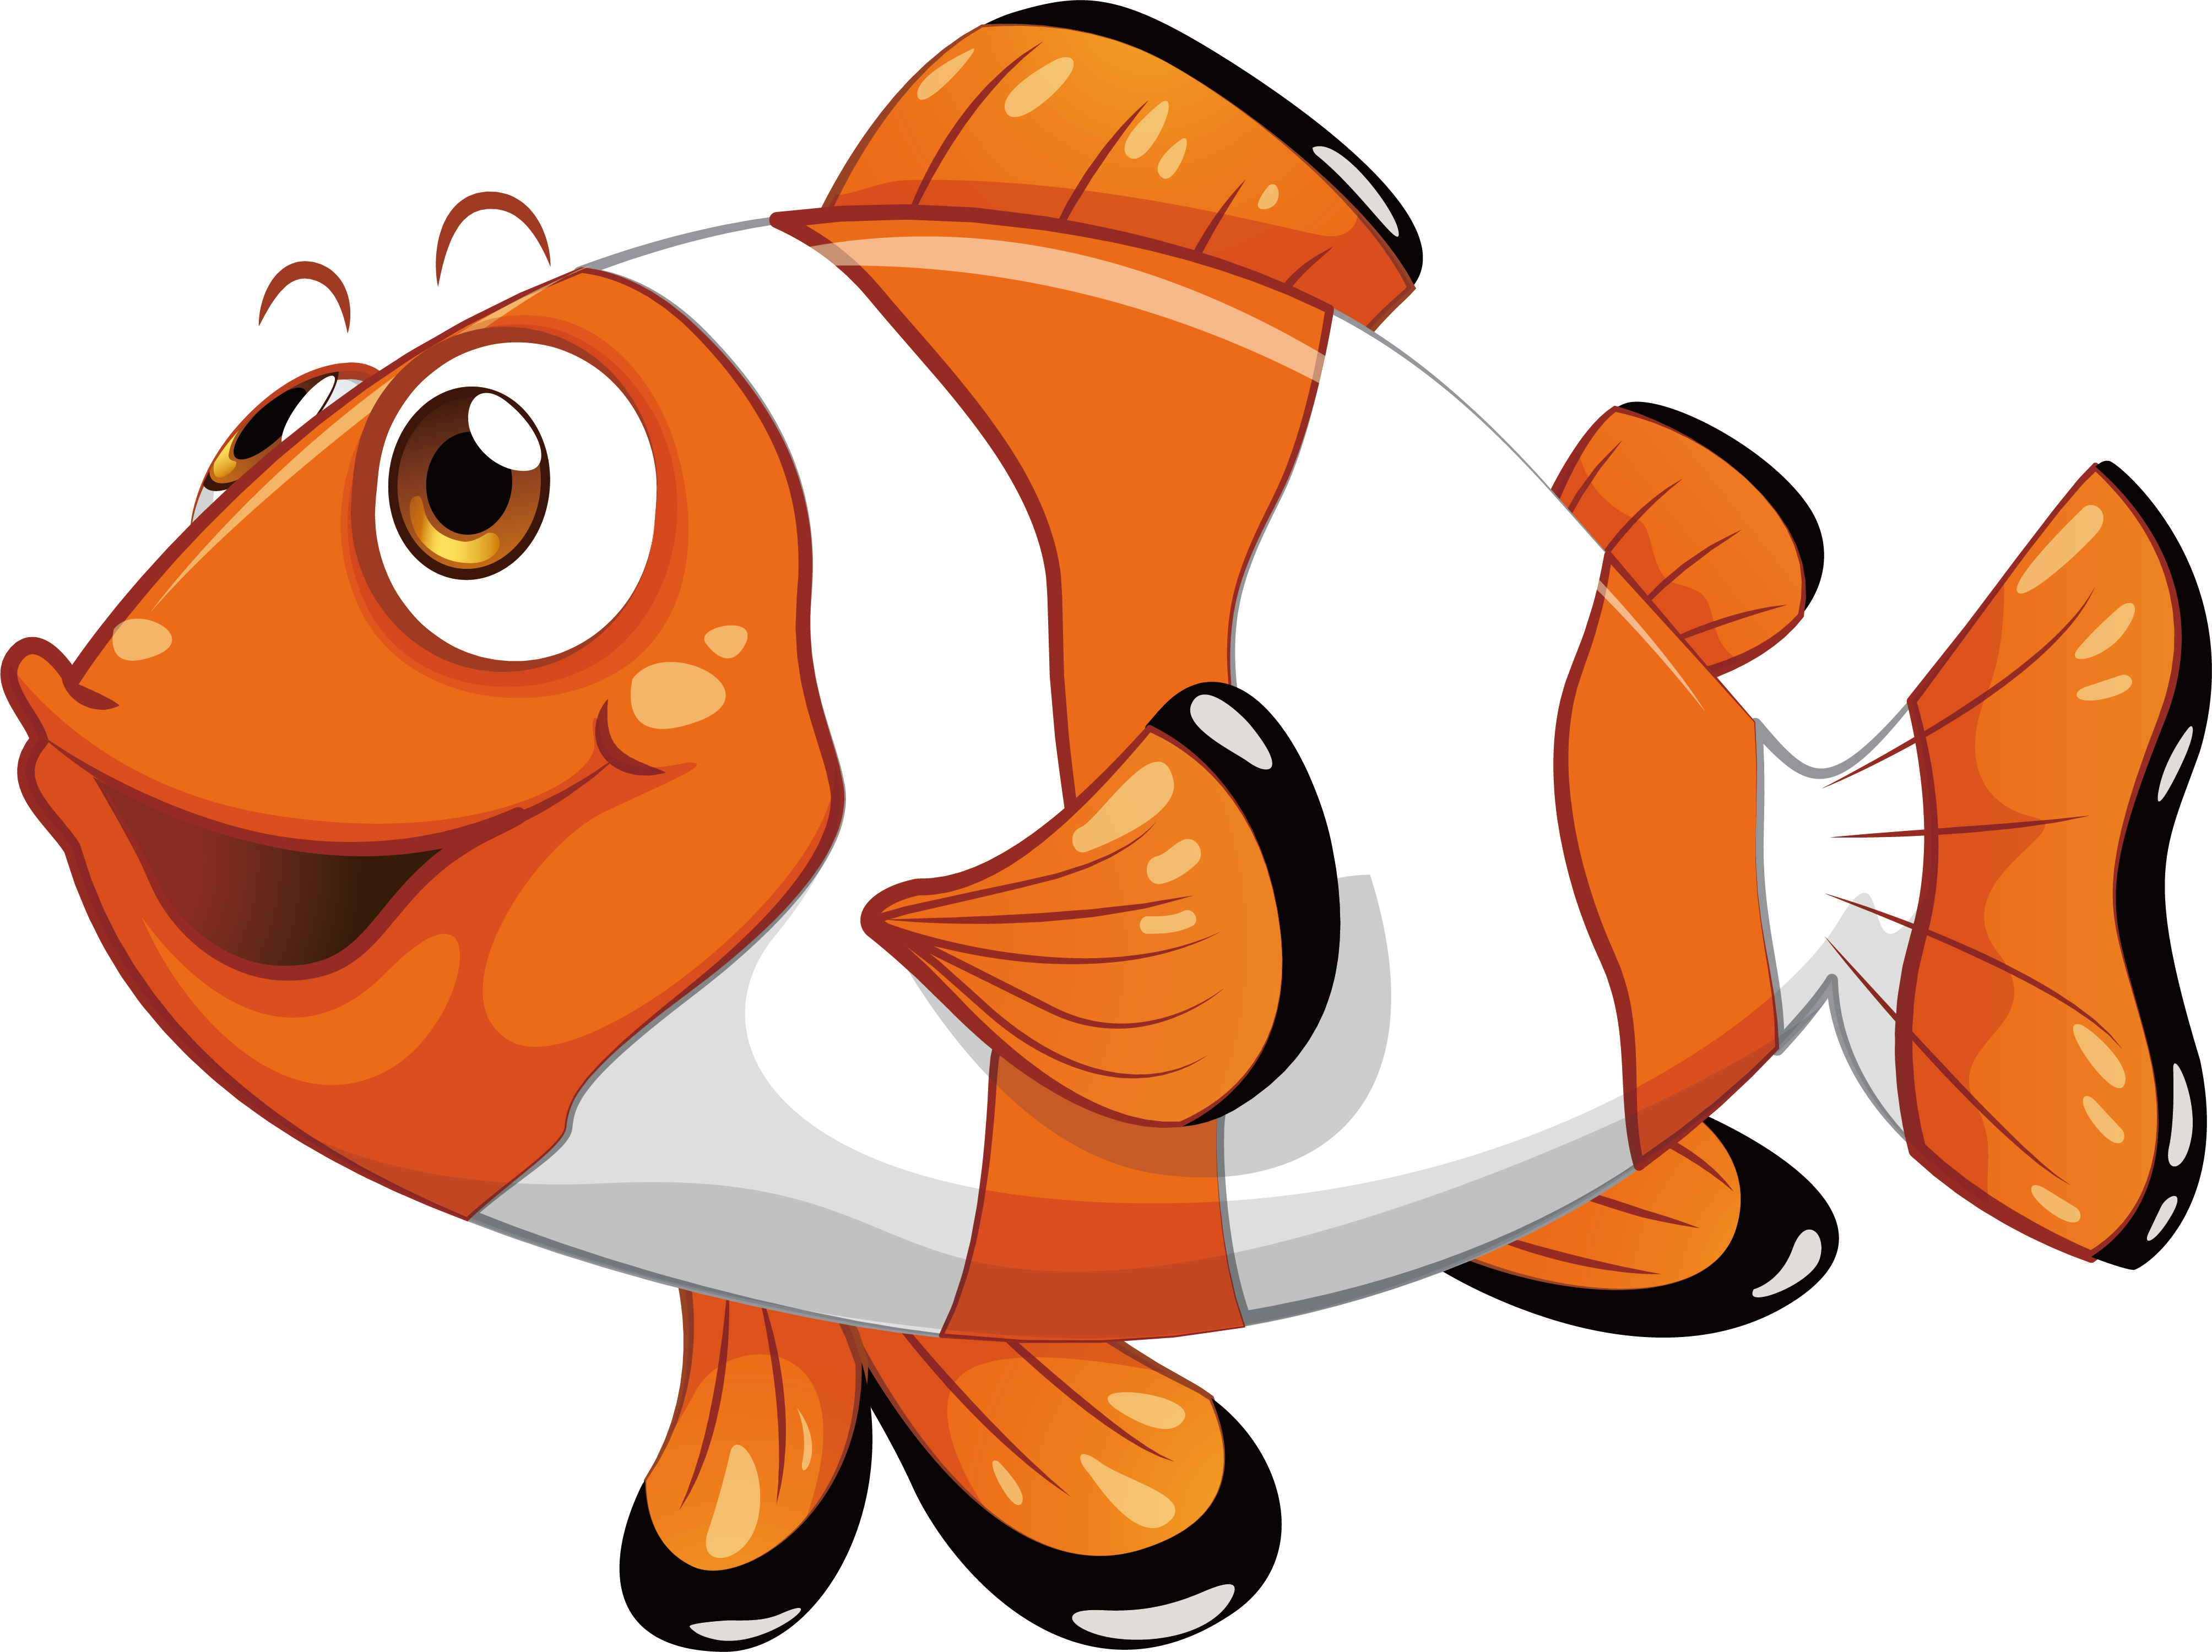 Royalty-free Fish Clip art - Striped clown fish png download - 4016* ...